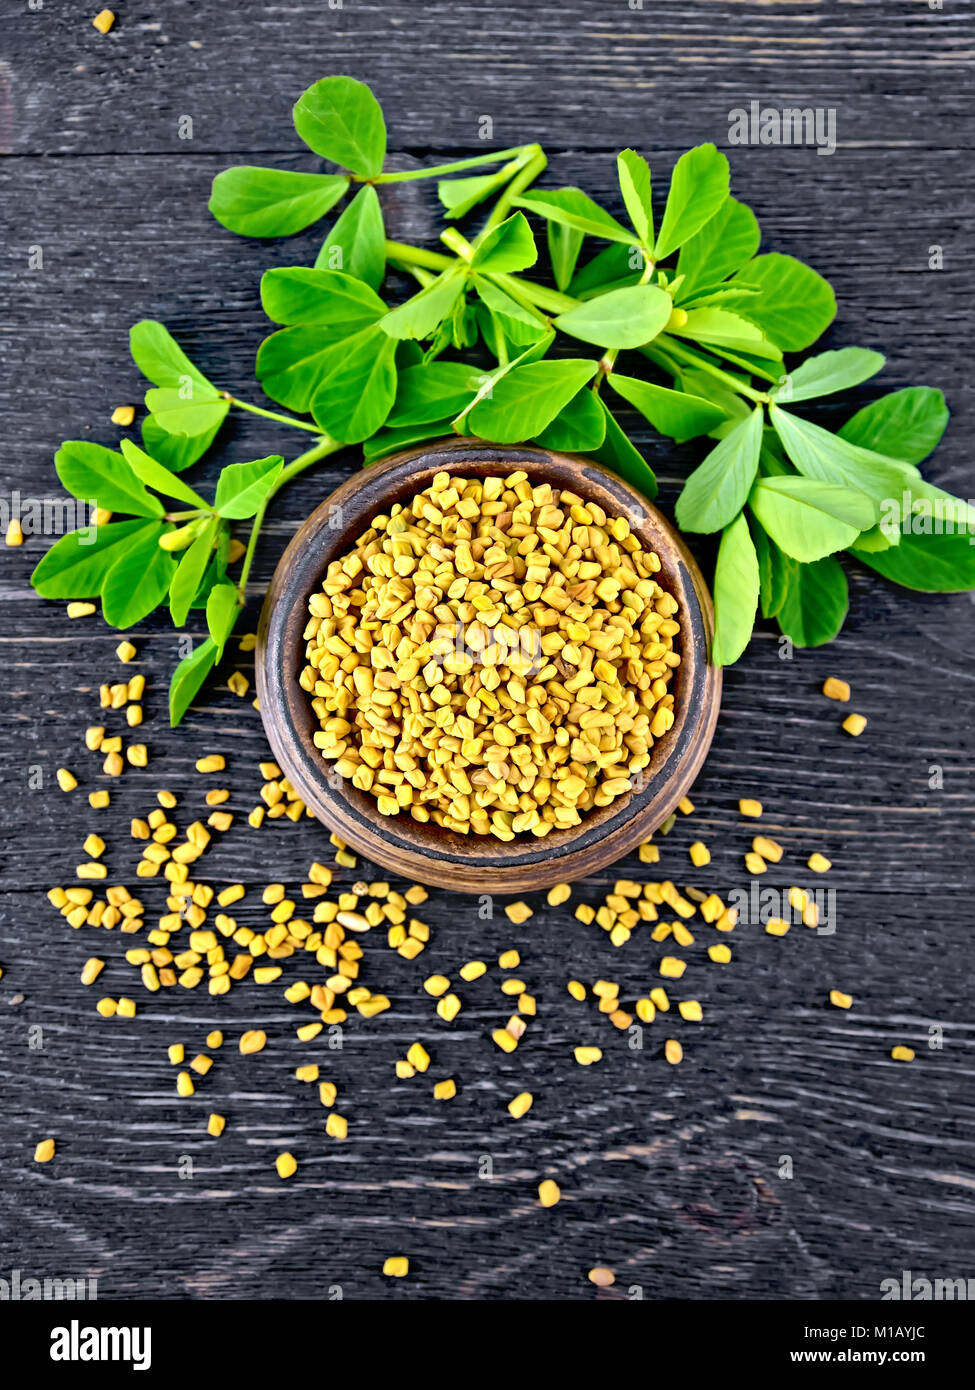 Fenugreek seeds in a bowl and on a table with green leaves on a wooden plank background on top Stock Photo